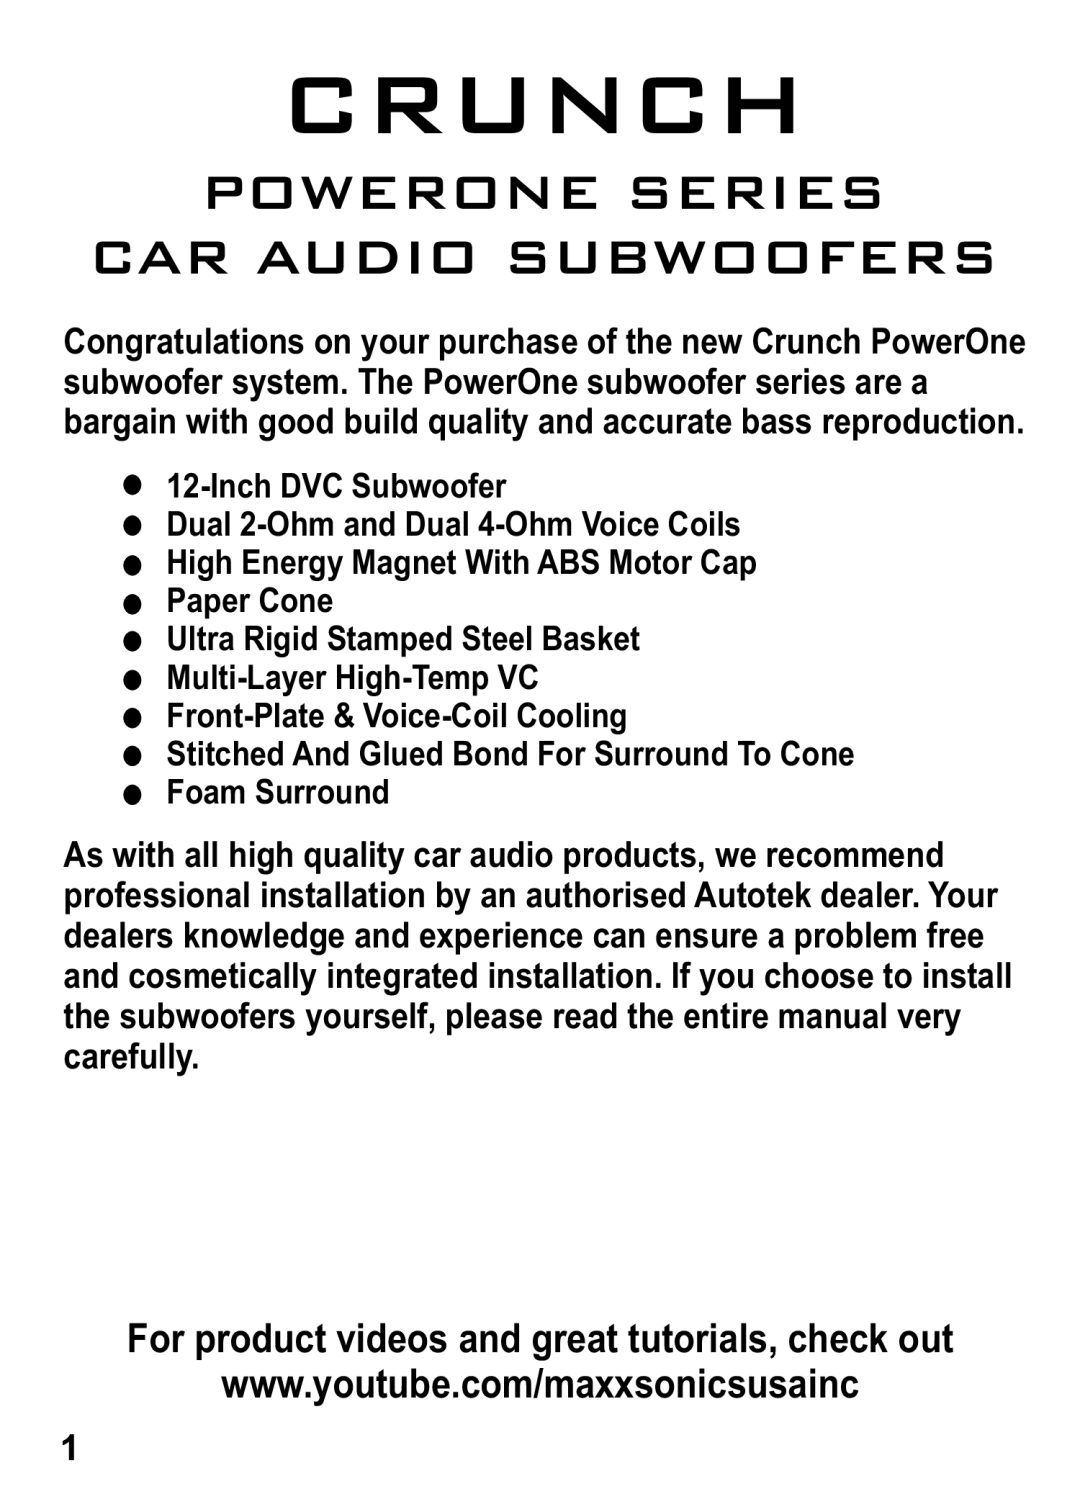 Maxxsonics P1-12D2 manual Crunch, Powerone Series Car Audio Subwoofers, For product videos and great tutorials, check out 